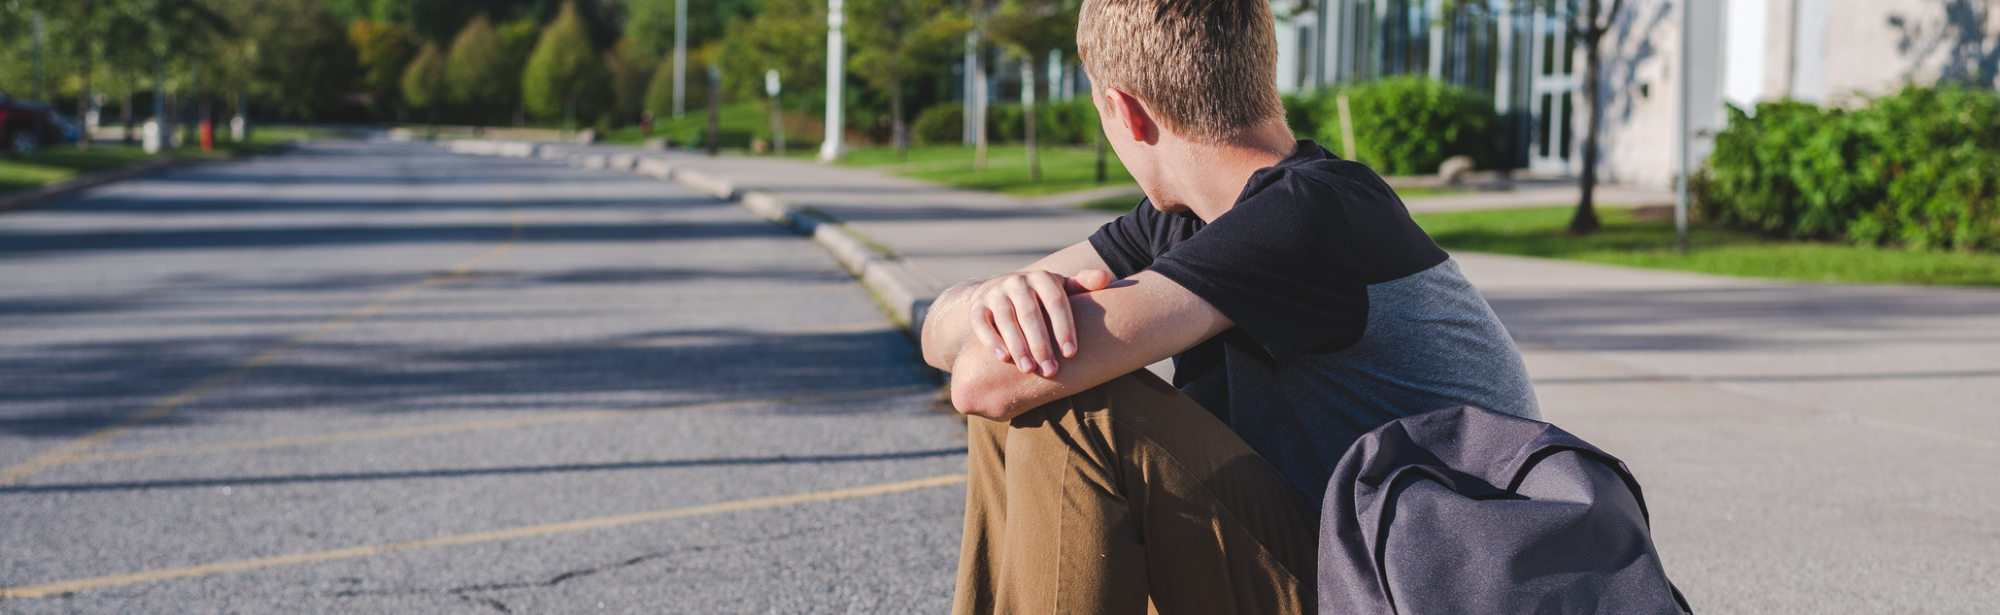 Teen sitting alone on curb of street with backpack